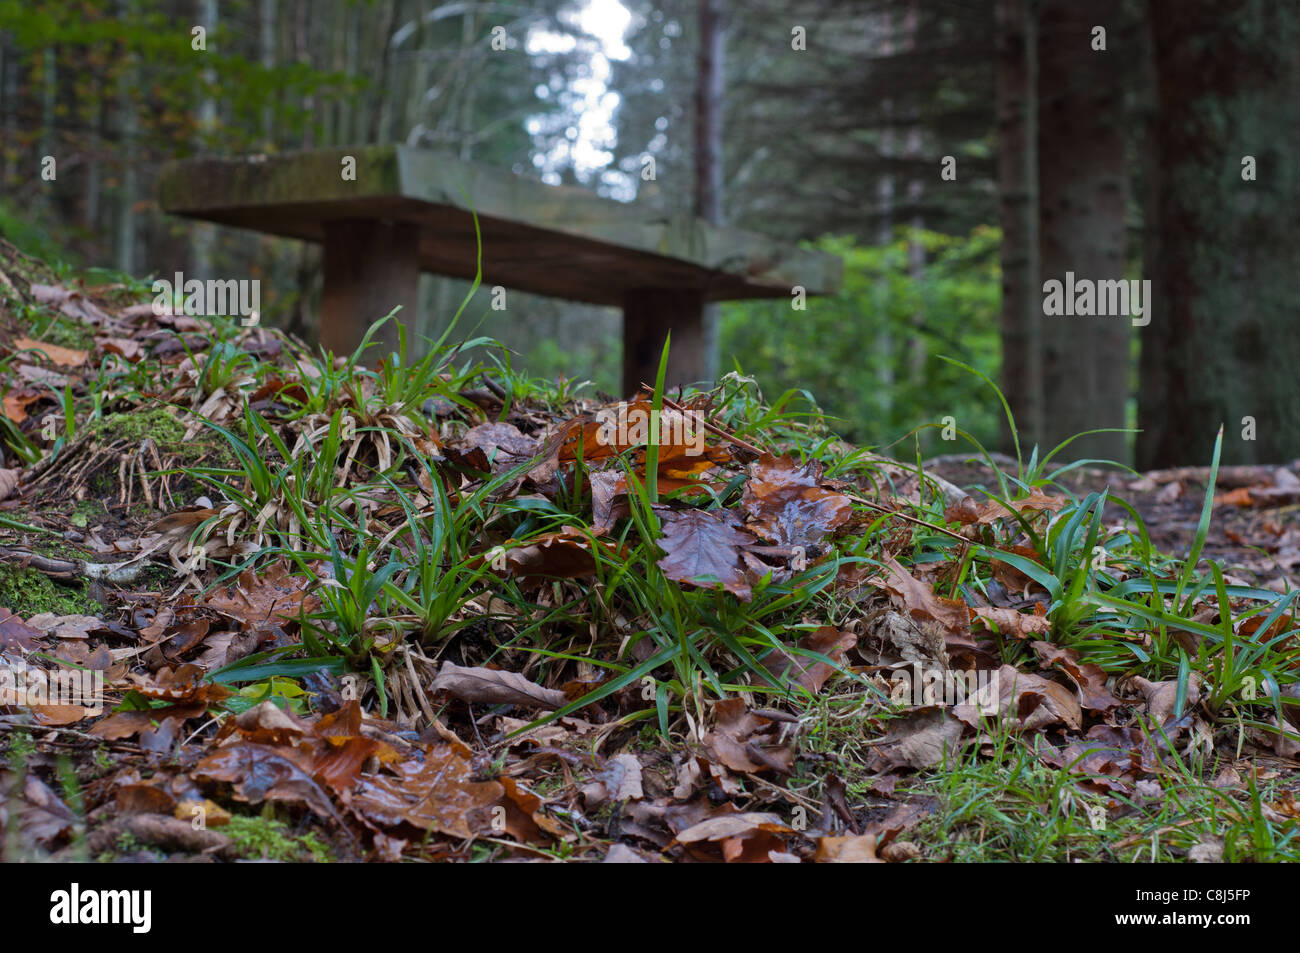 A wooden seat in Hamsterley forest in County Durham, surrounded by the fallen leaves of Autumn. Stock Photo